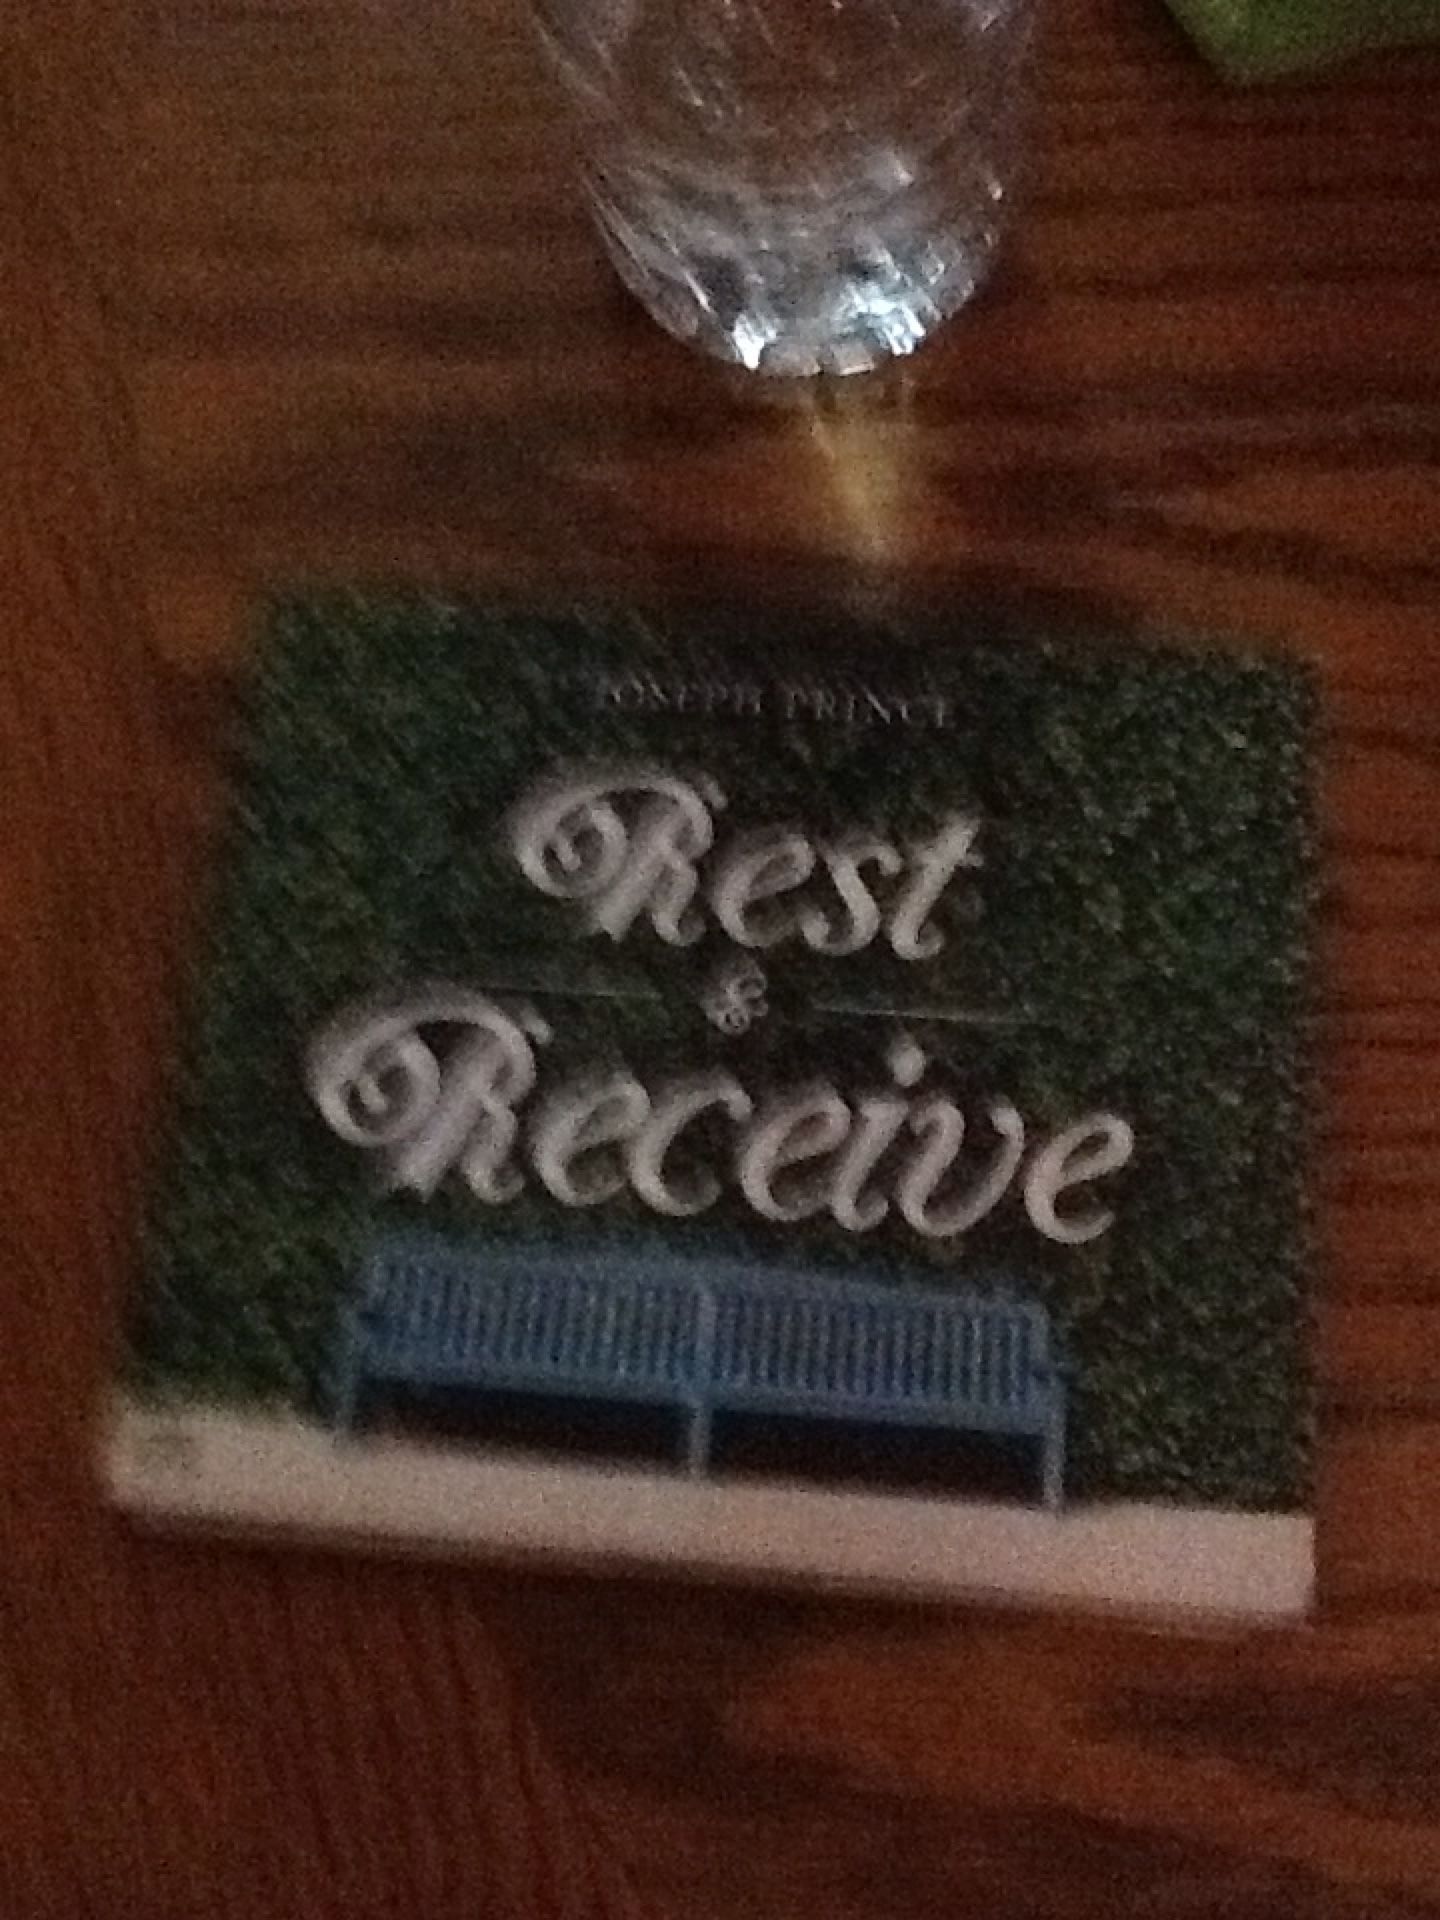 Rest &. Receive. By Joseph prince audio book